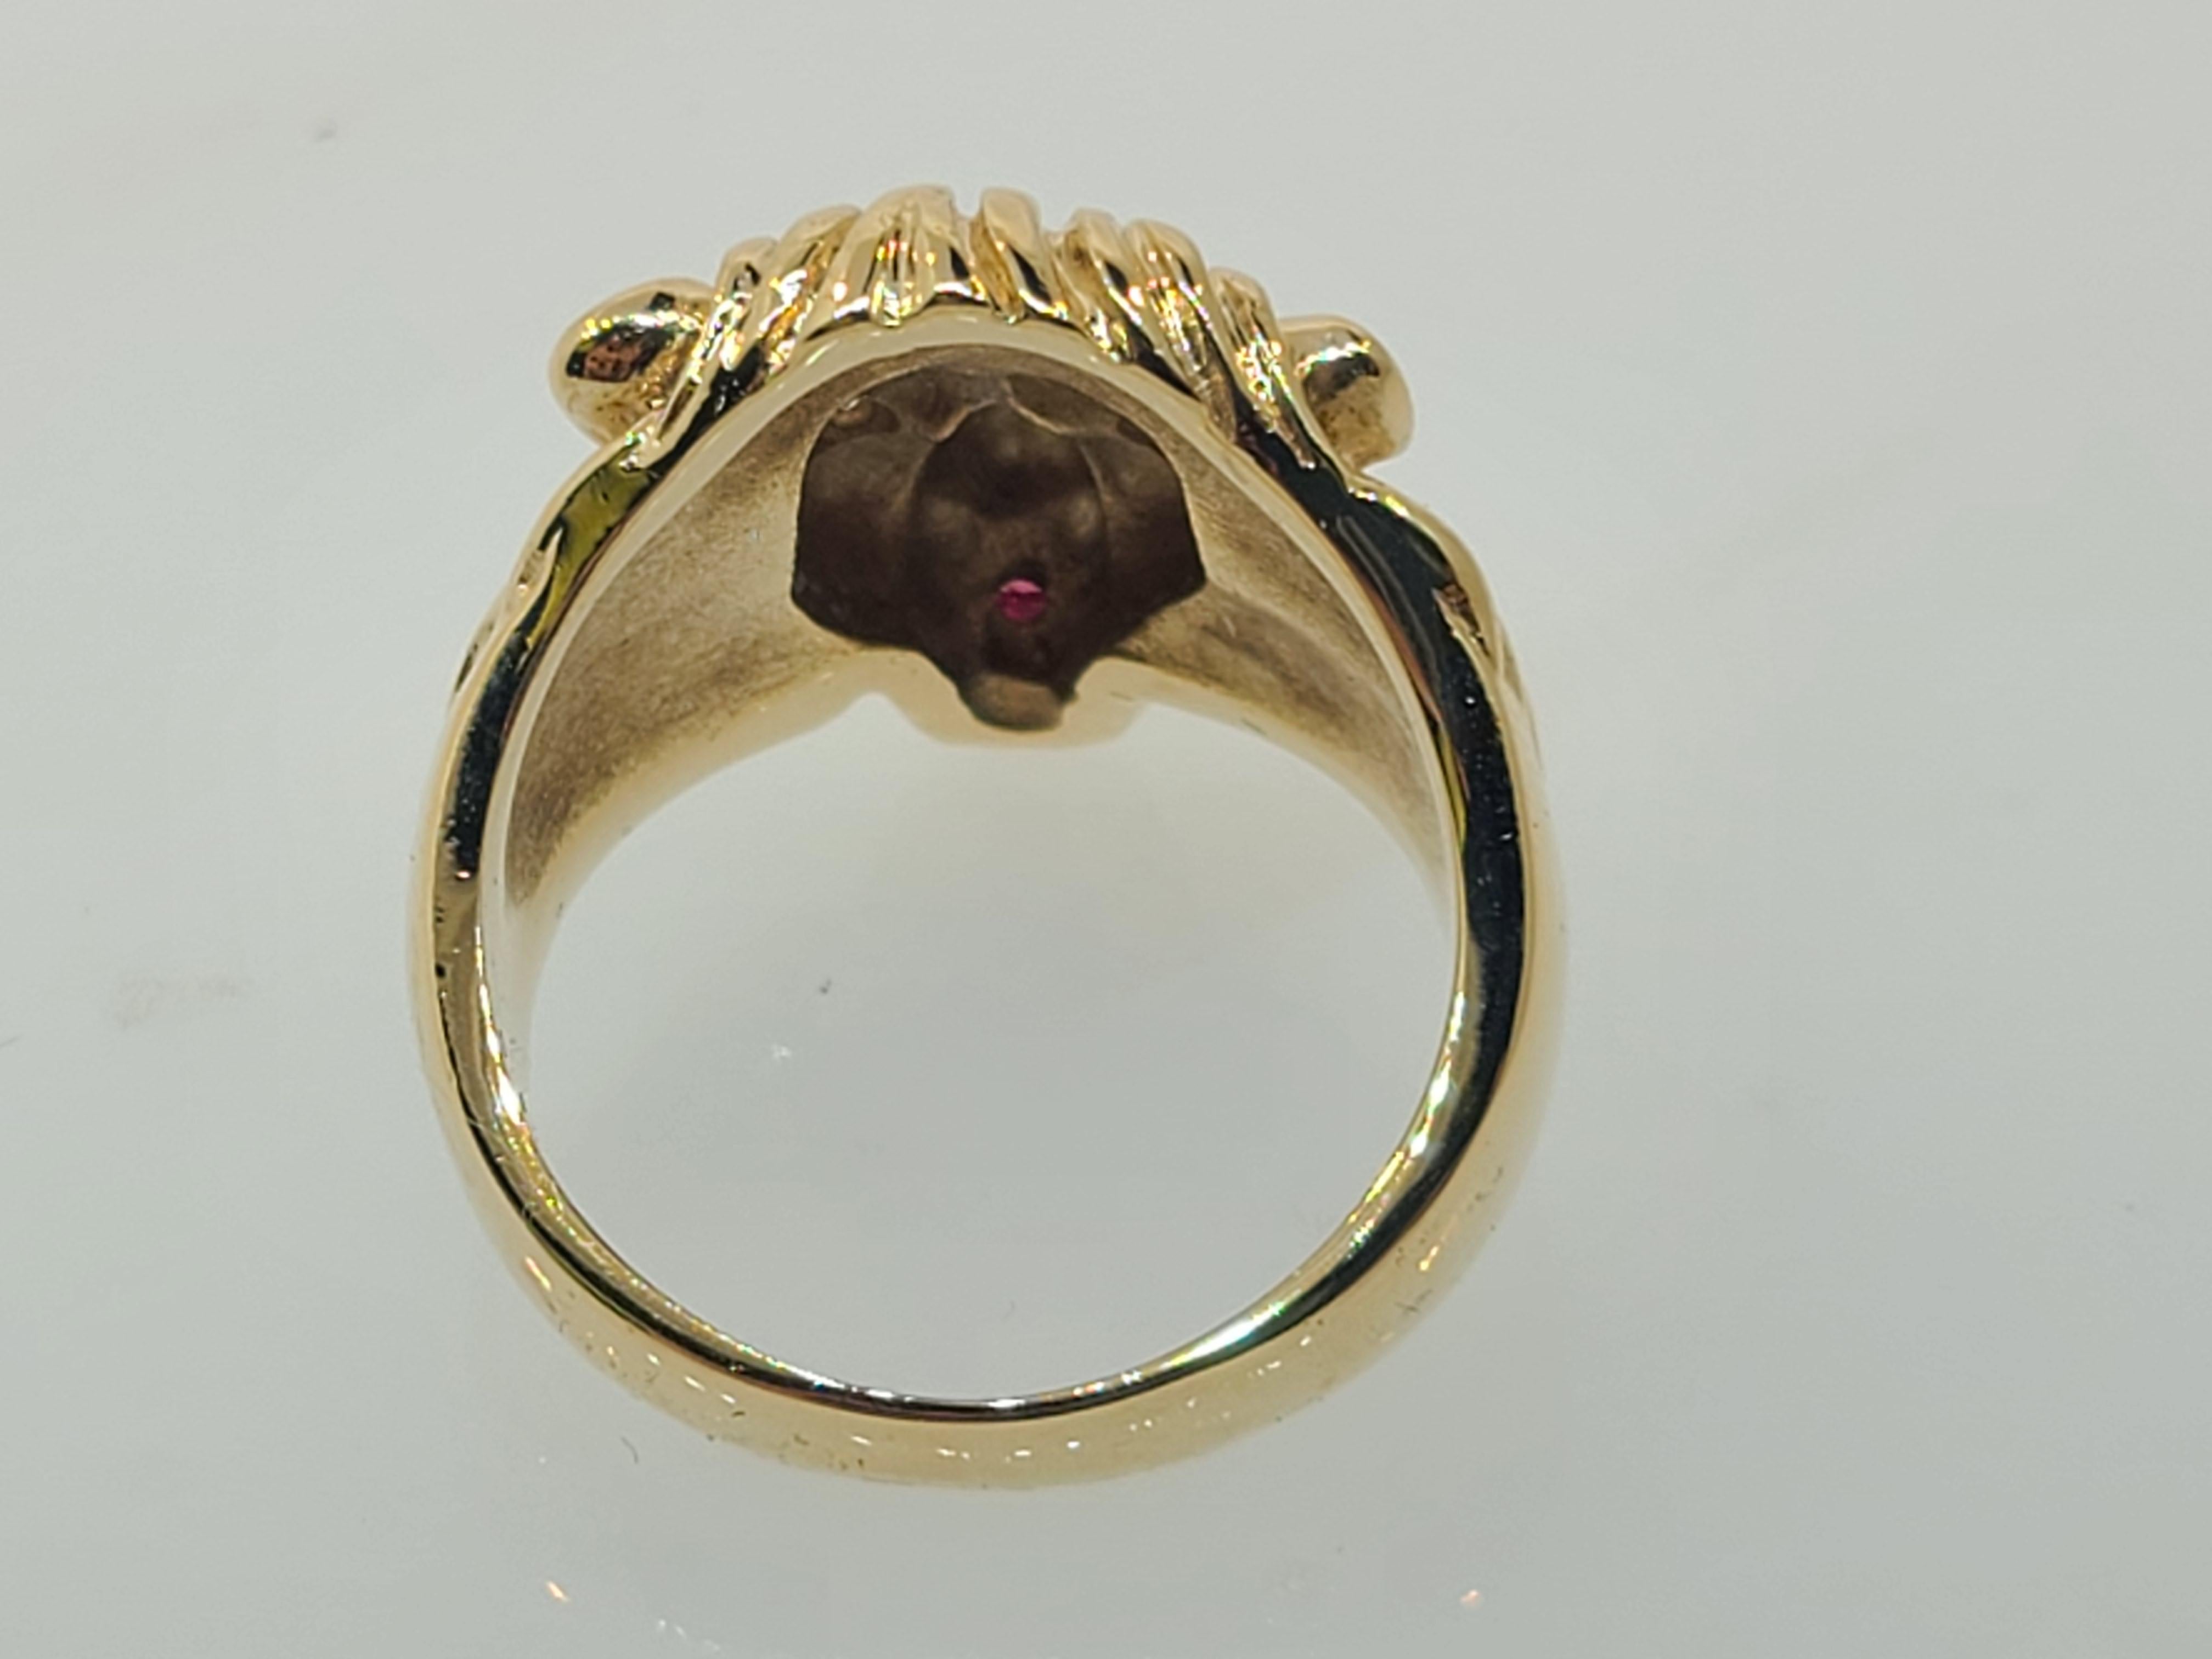 Contemporary Vintage 10k Lion's Head Ring with Diamond Eyes and Ruby Tongue